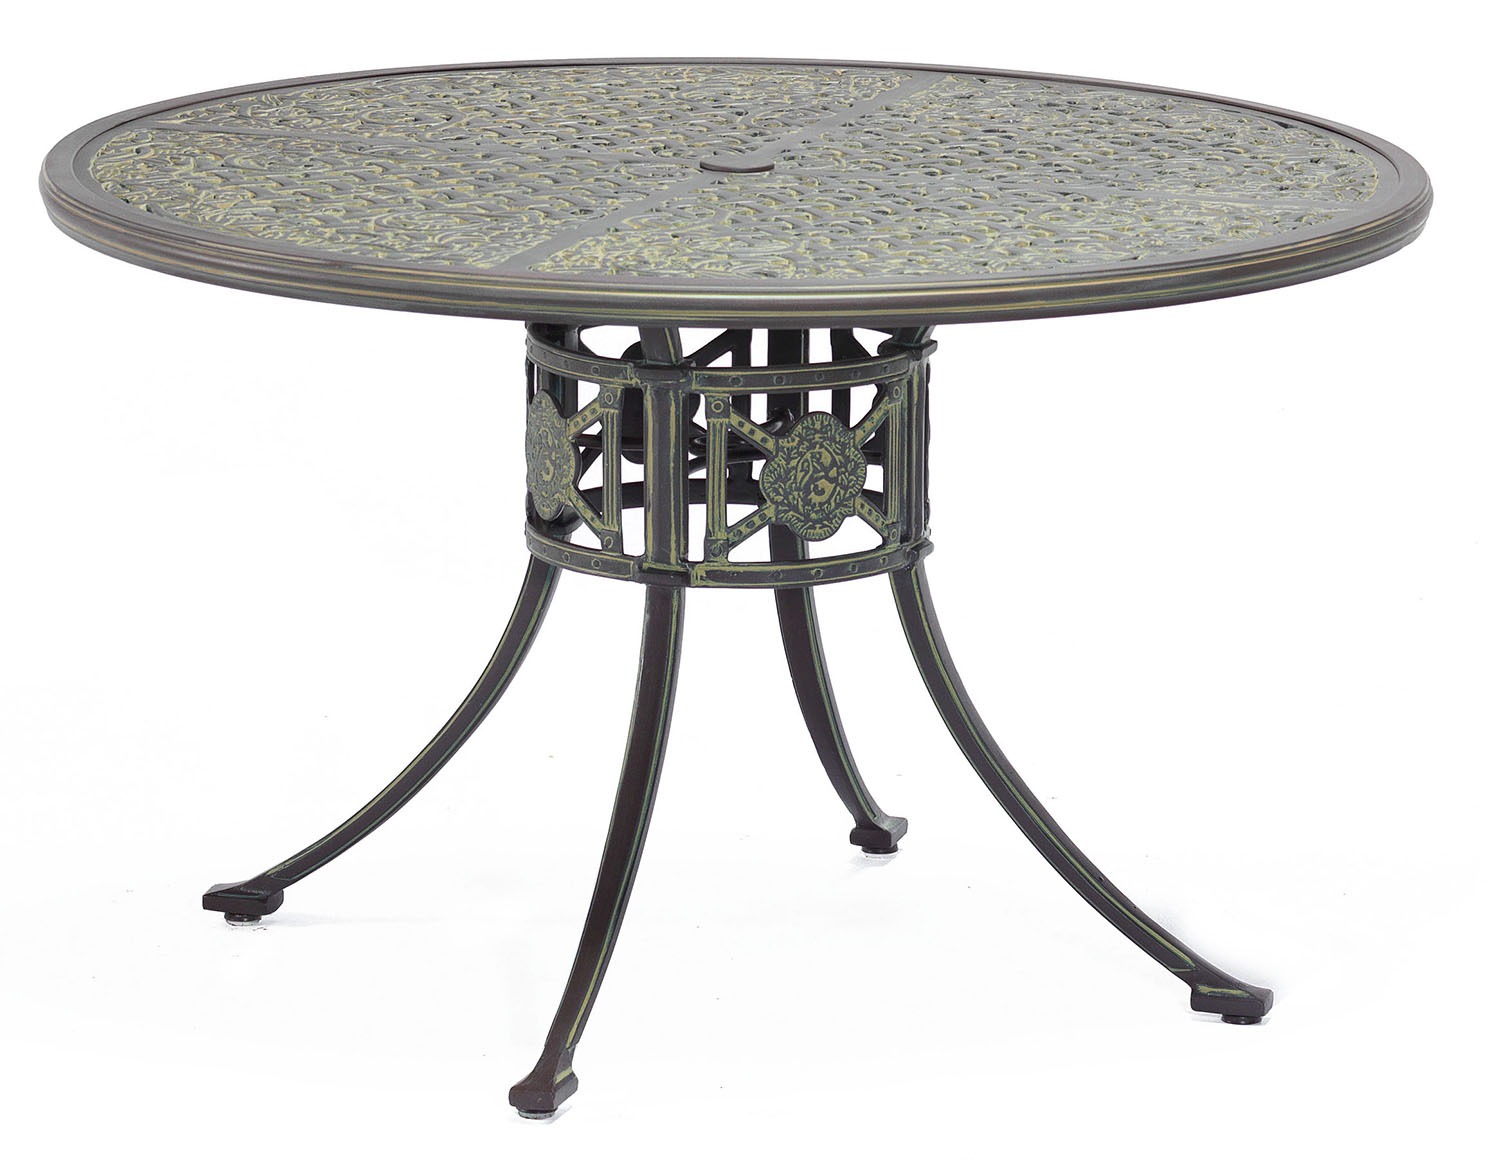 Luxor metal outdoor round dining table, from Brights of Nettlebed